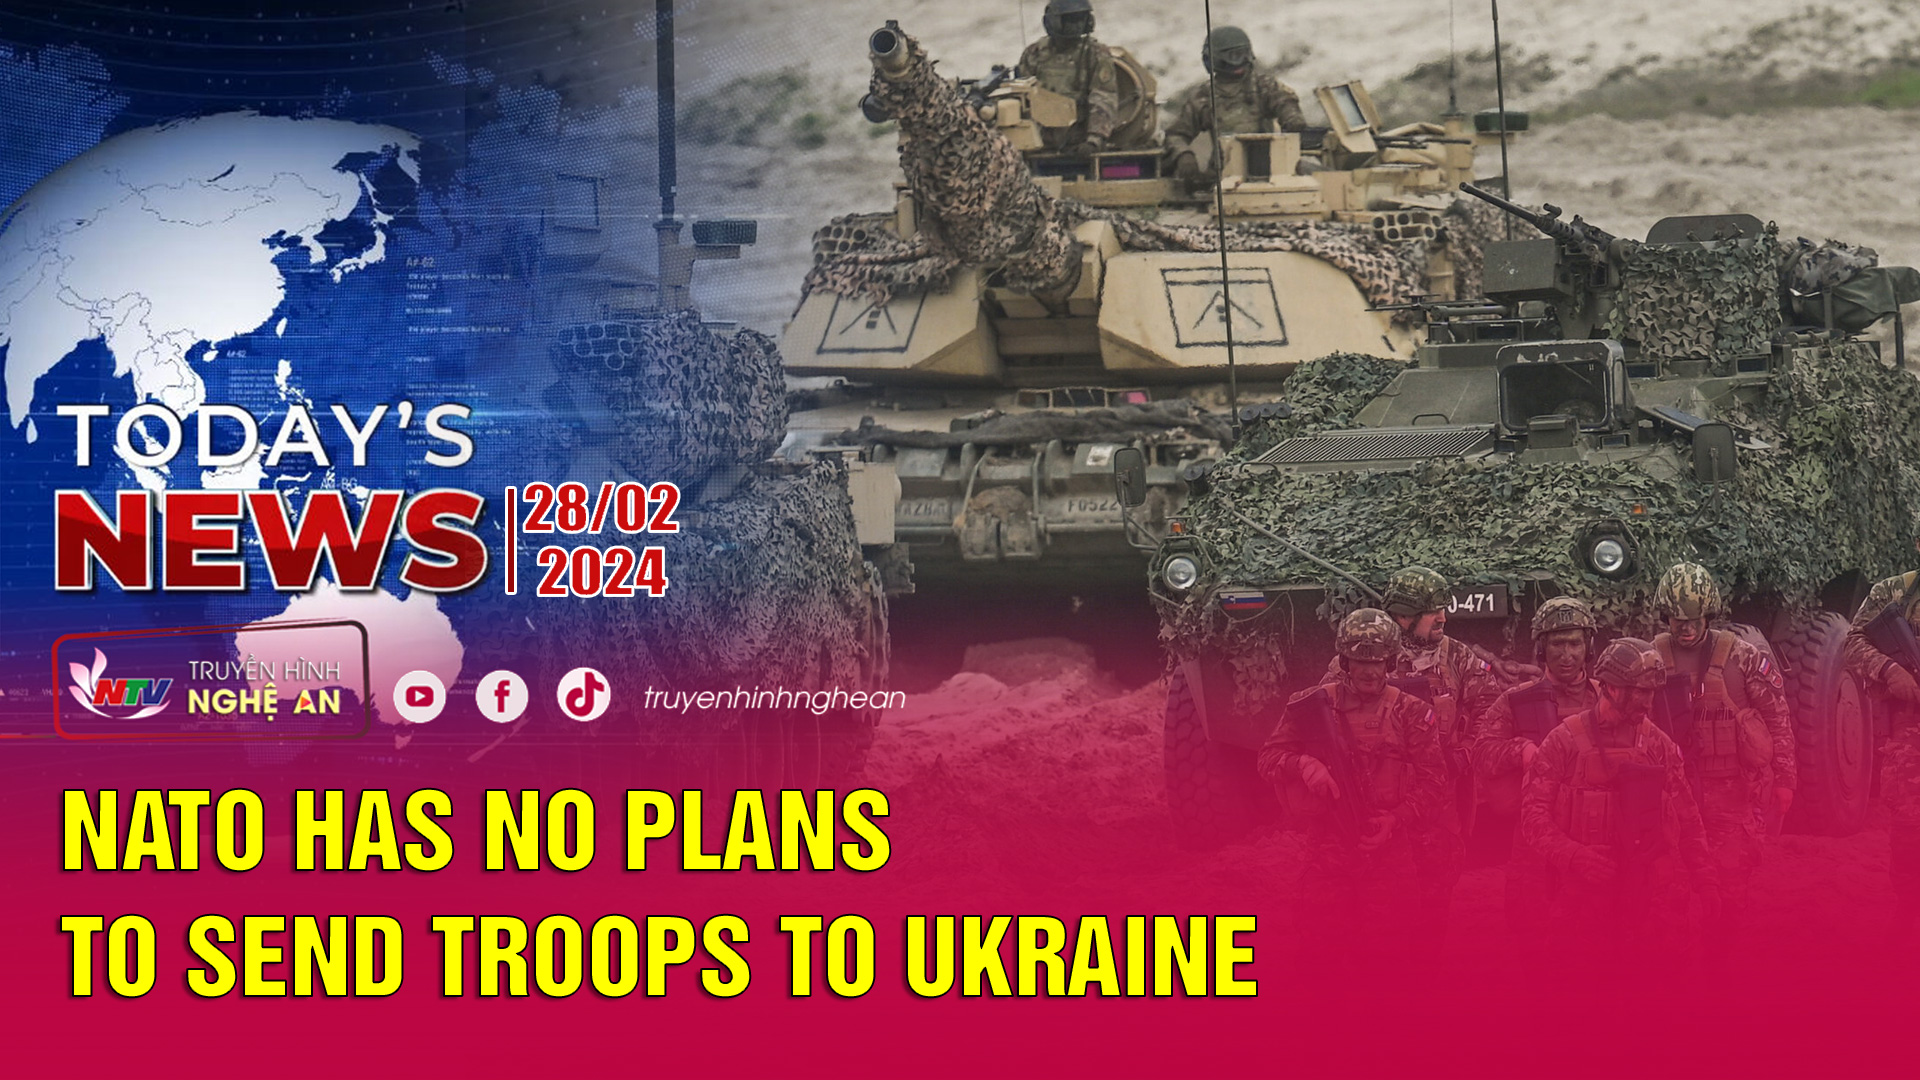 Today's News 28/2/2024: NATO has no plans to send troops to Ukraine